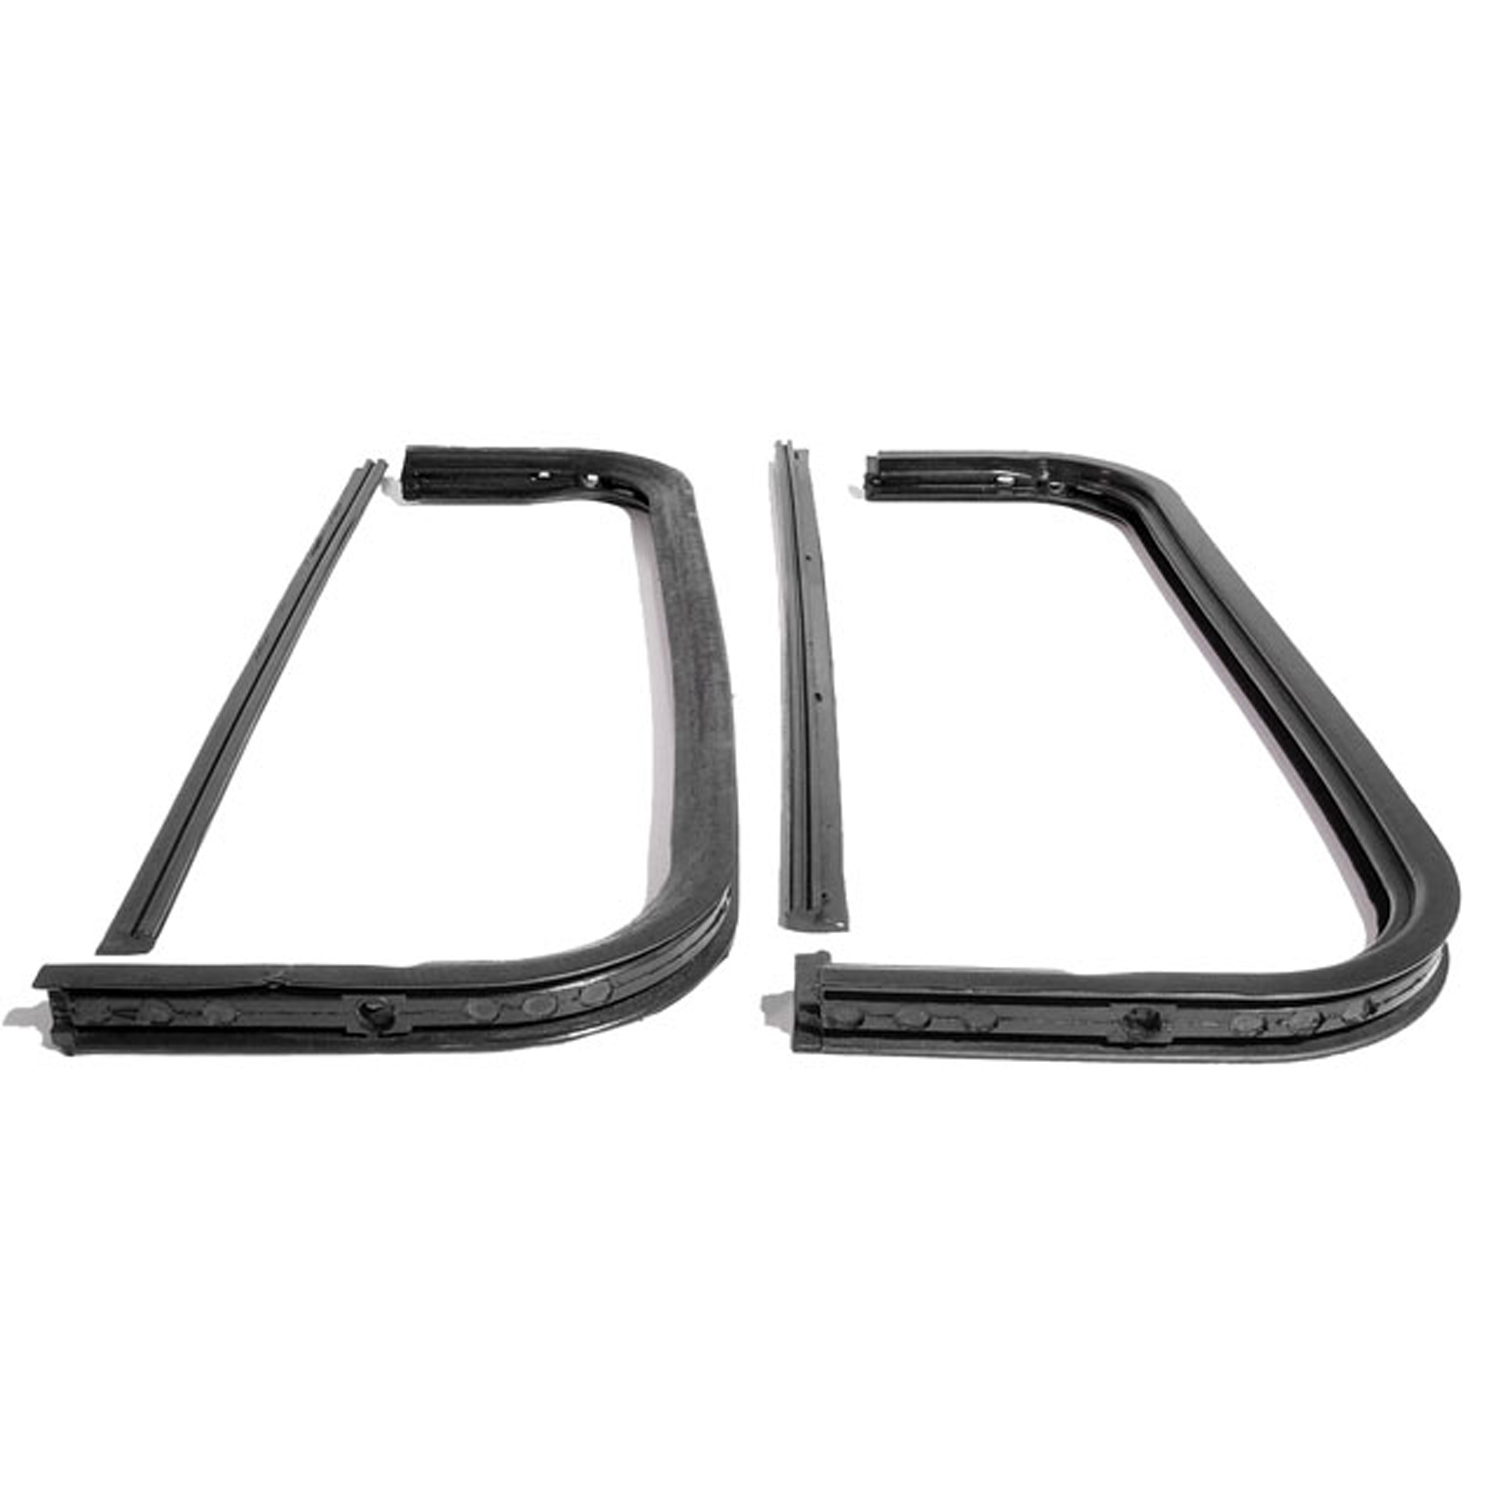 1960 Chevrolet Truck Vent Window Seals with Division Post Seals-WR 1900